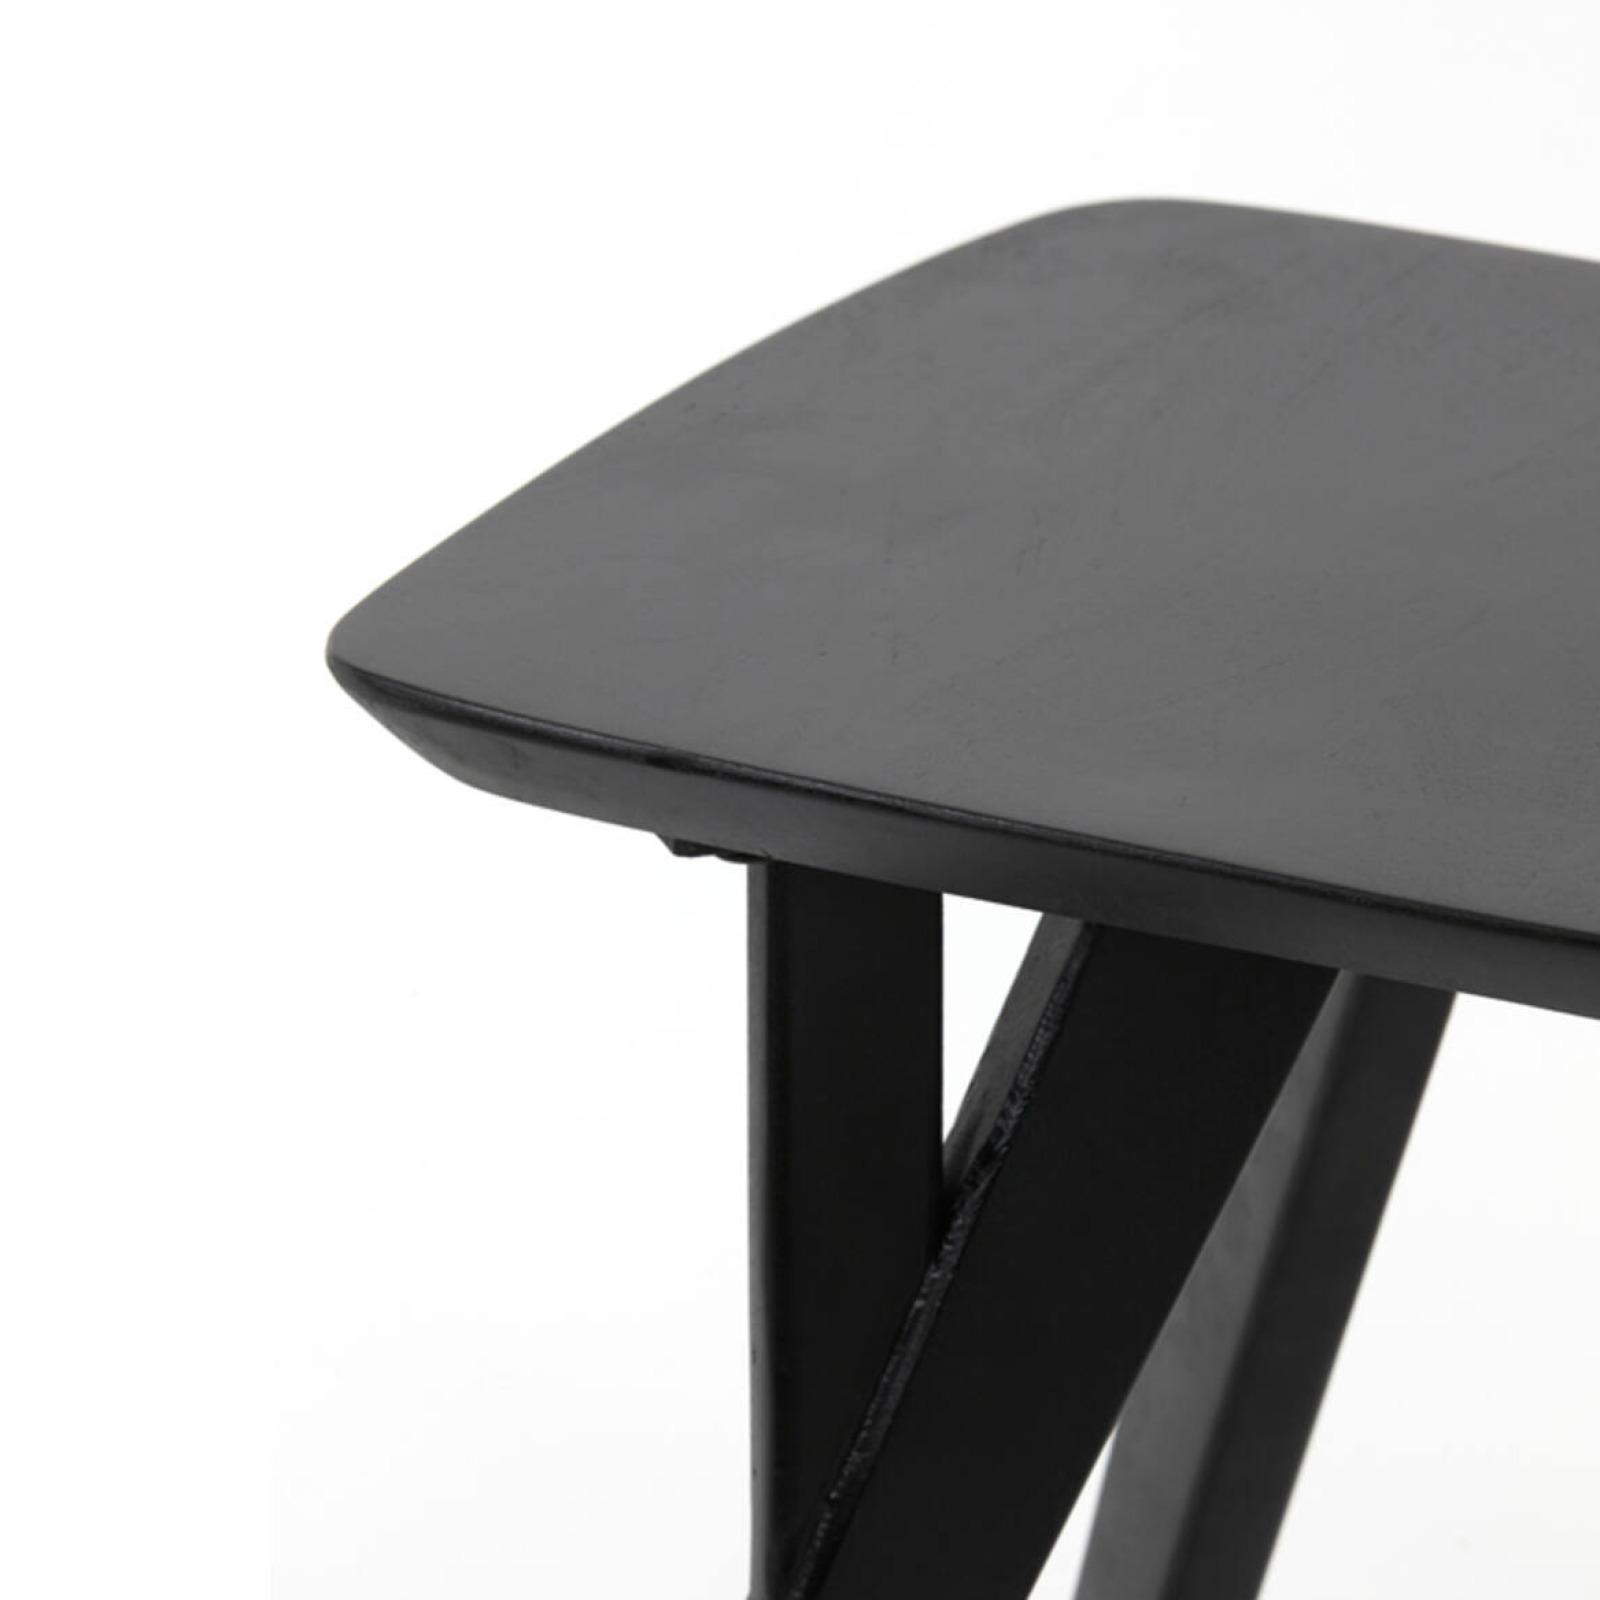 Quenza black side table